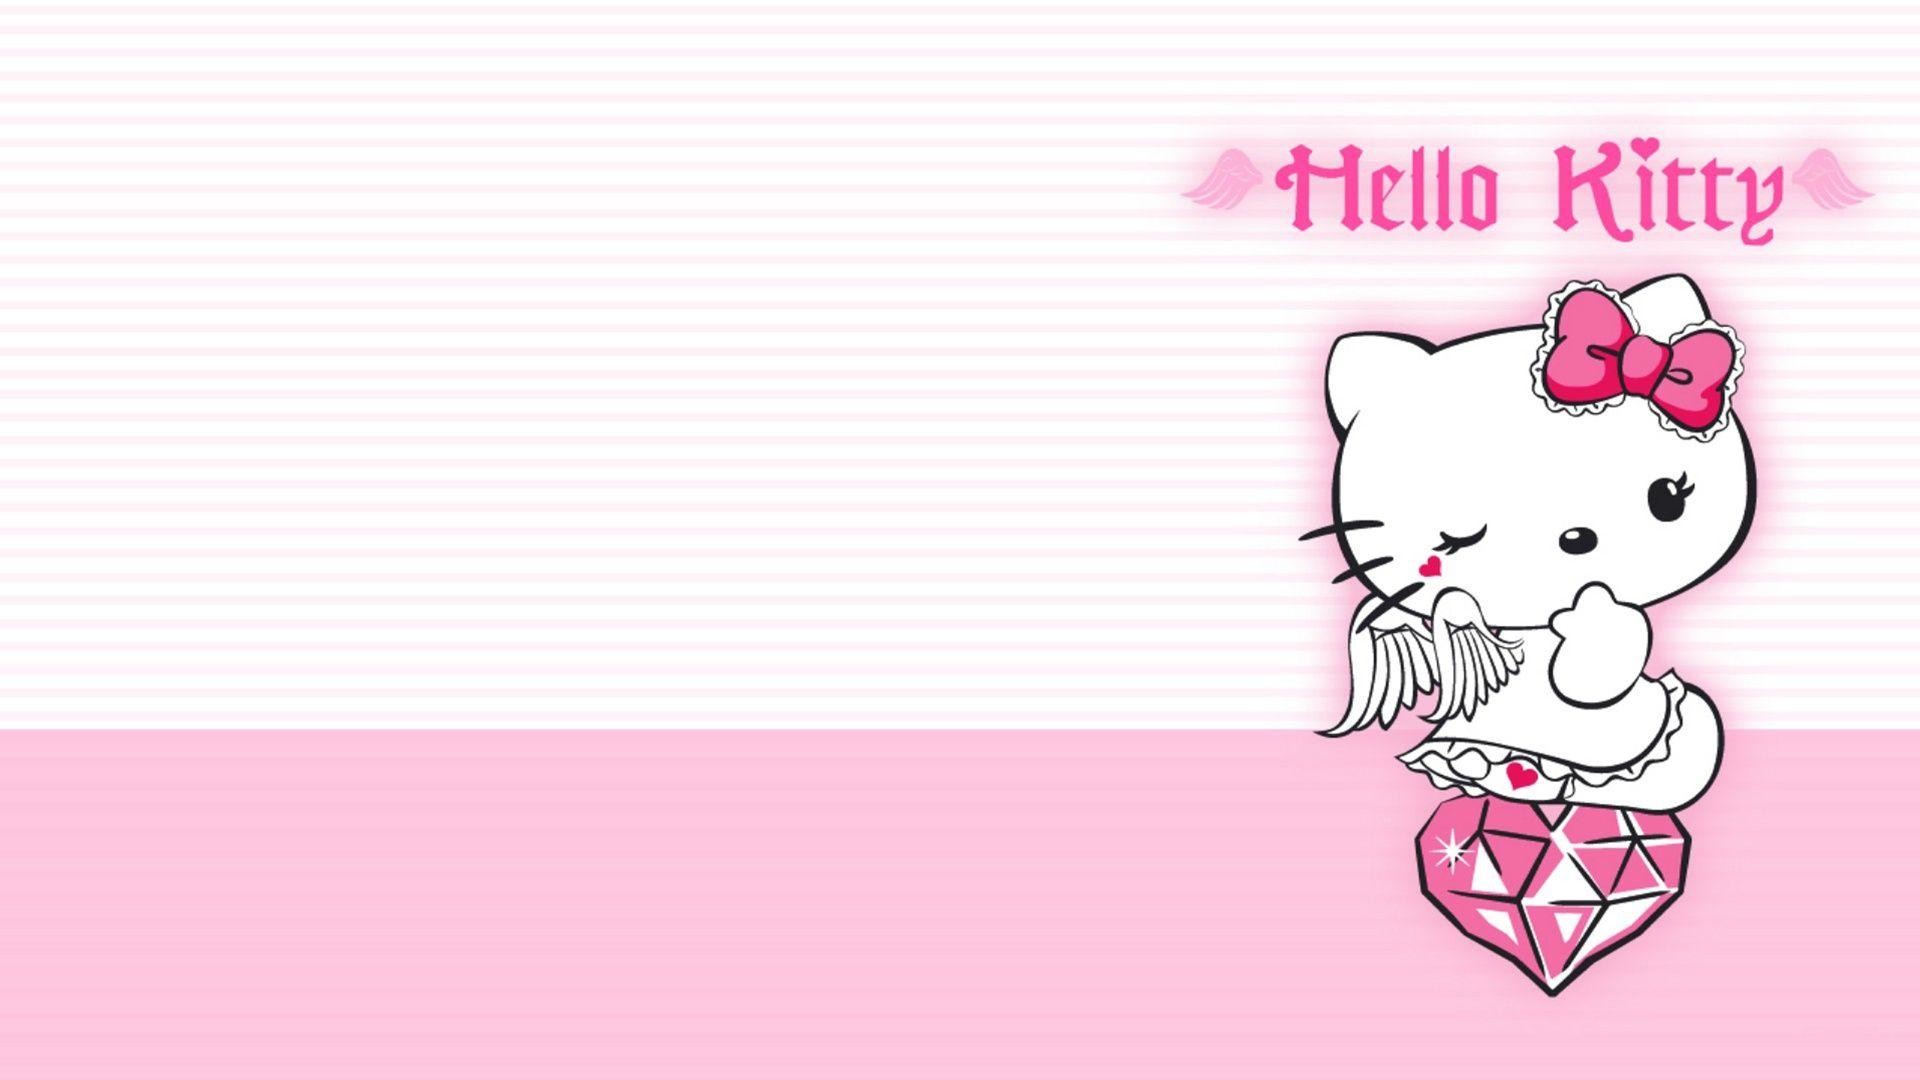 Free Download Pink Hello Kitty Background 64 Images 1920x1080 For Your Desktop Mobile Tablet Explore 60 Hello Kitty Computer Wallpaper Free Hello Kitty Winter Wallpaper Hello Kitty Pictures Wallpaper Touched up, cropped and adopted for wallpaper use by minh tan, digitalcitizen.ca. free download pink hello kitty